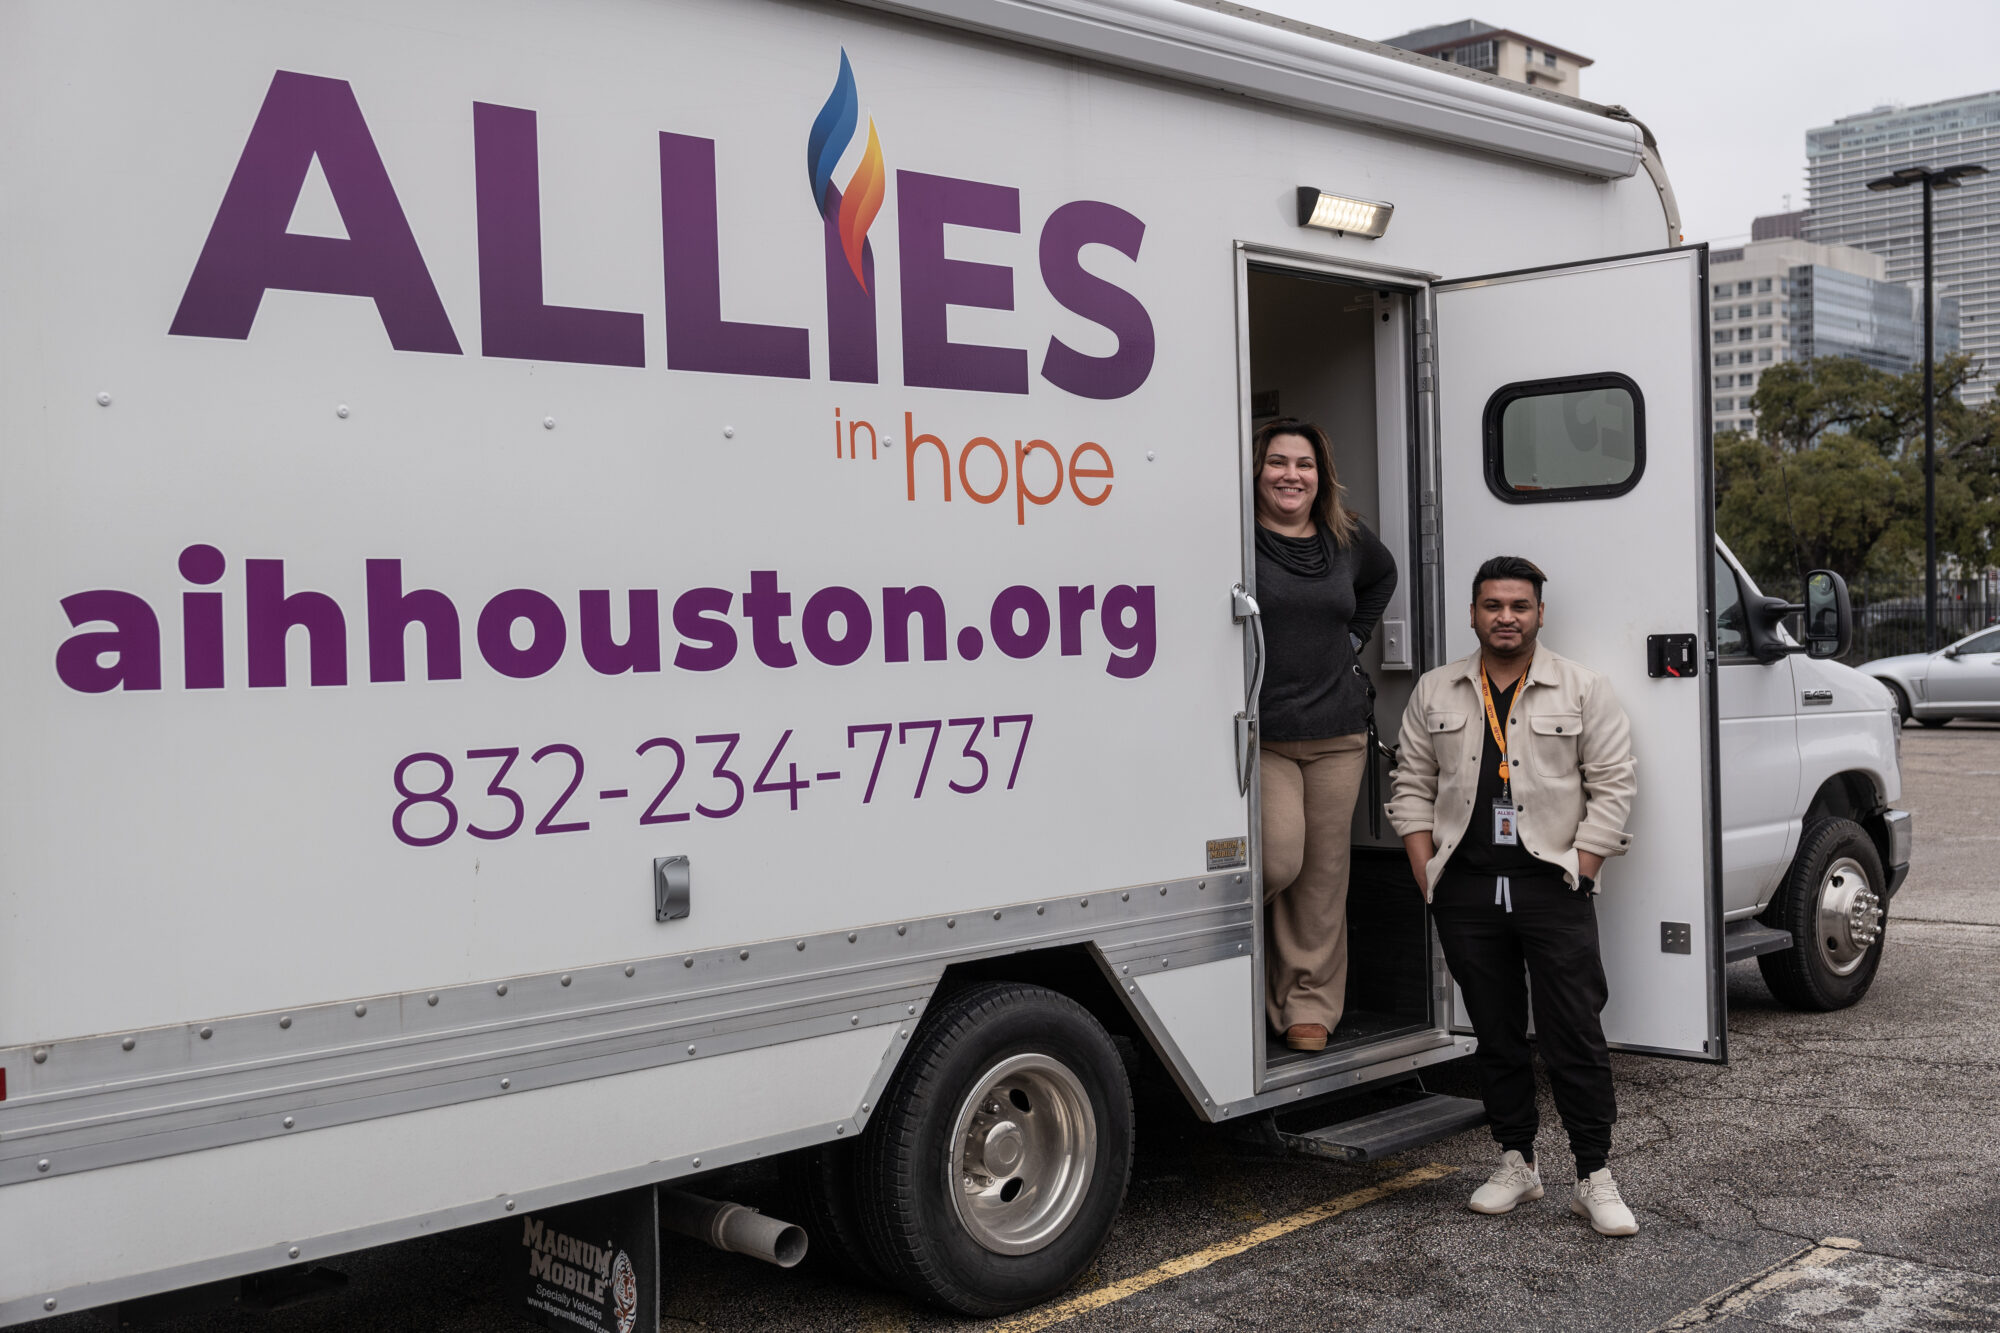 Two Allies in Hope employees stand beside their mobile health unit which provides HIV testing and information around Houston.